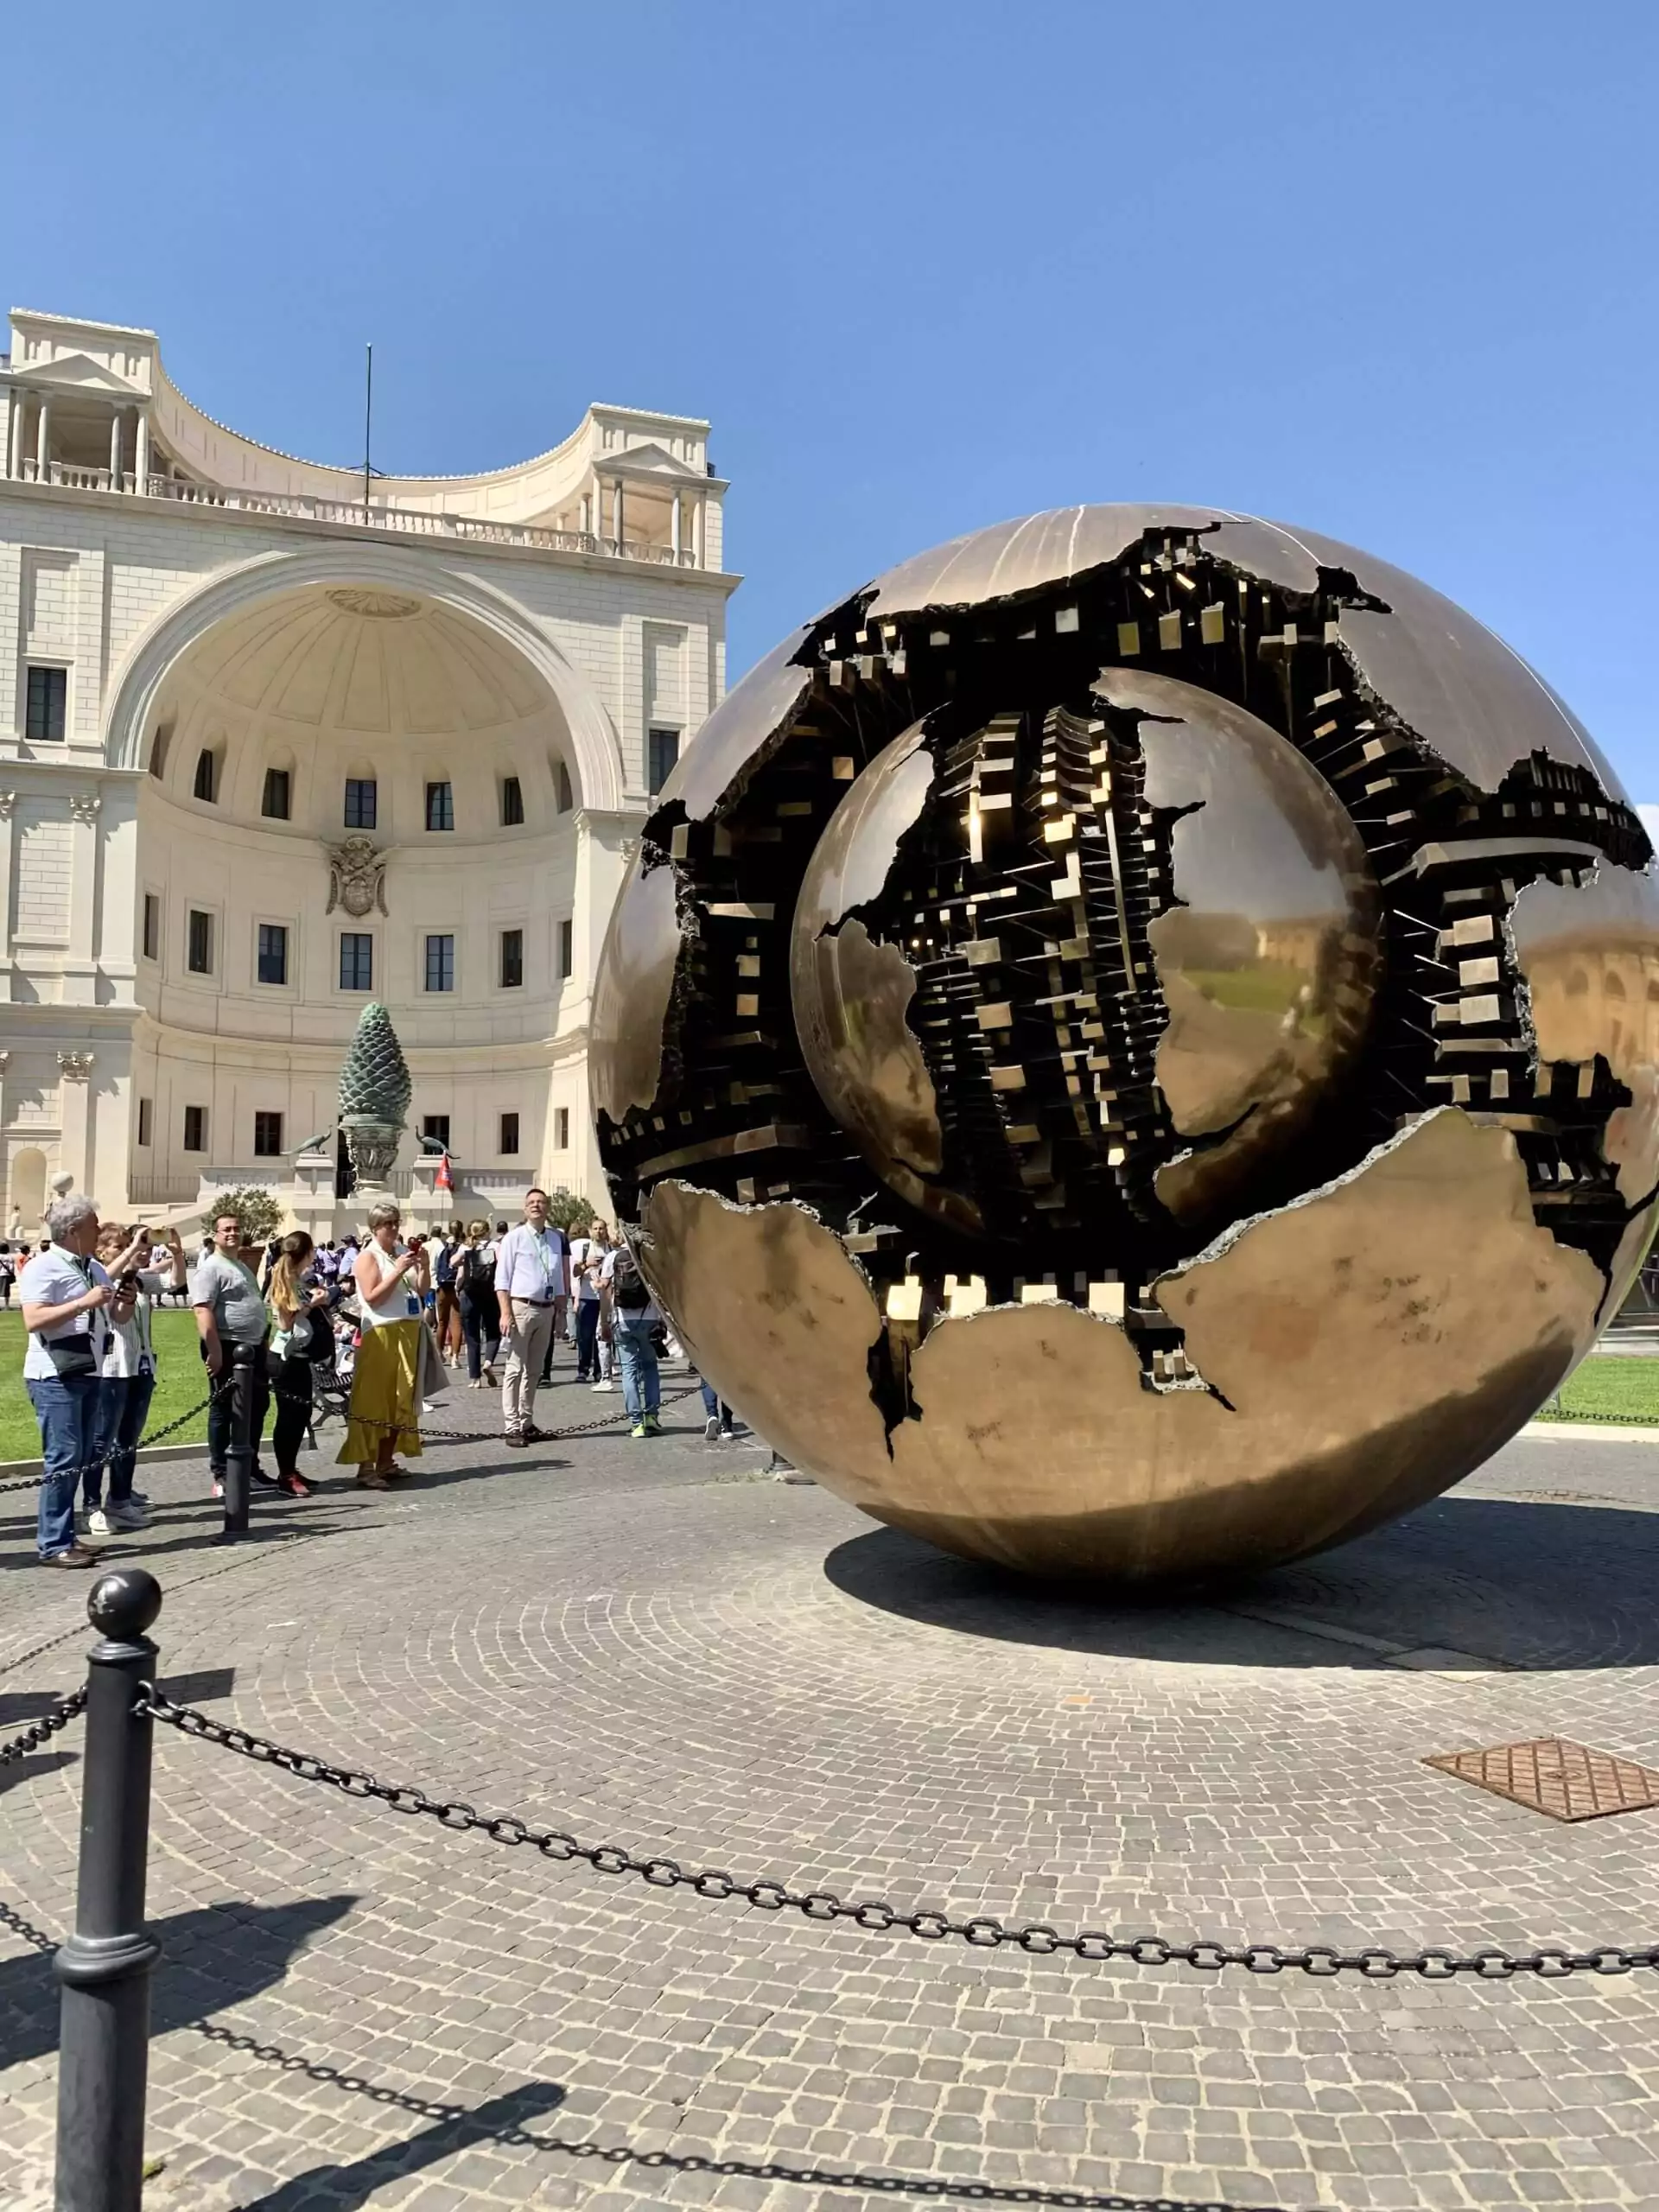 Pomodoro's Sphere within a Sphere